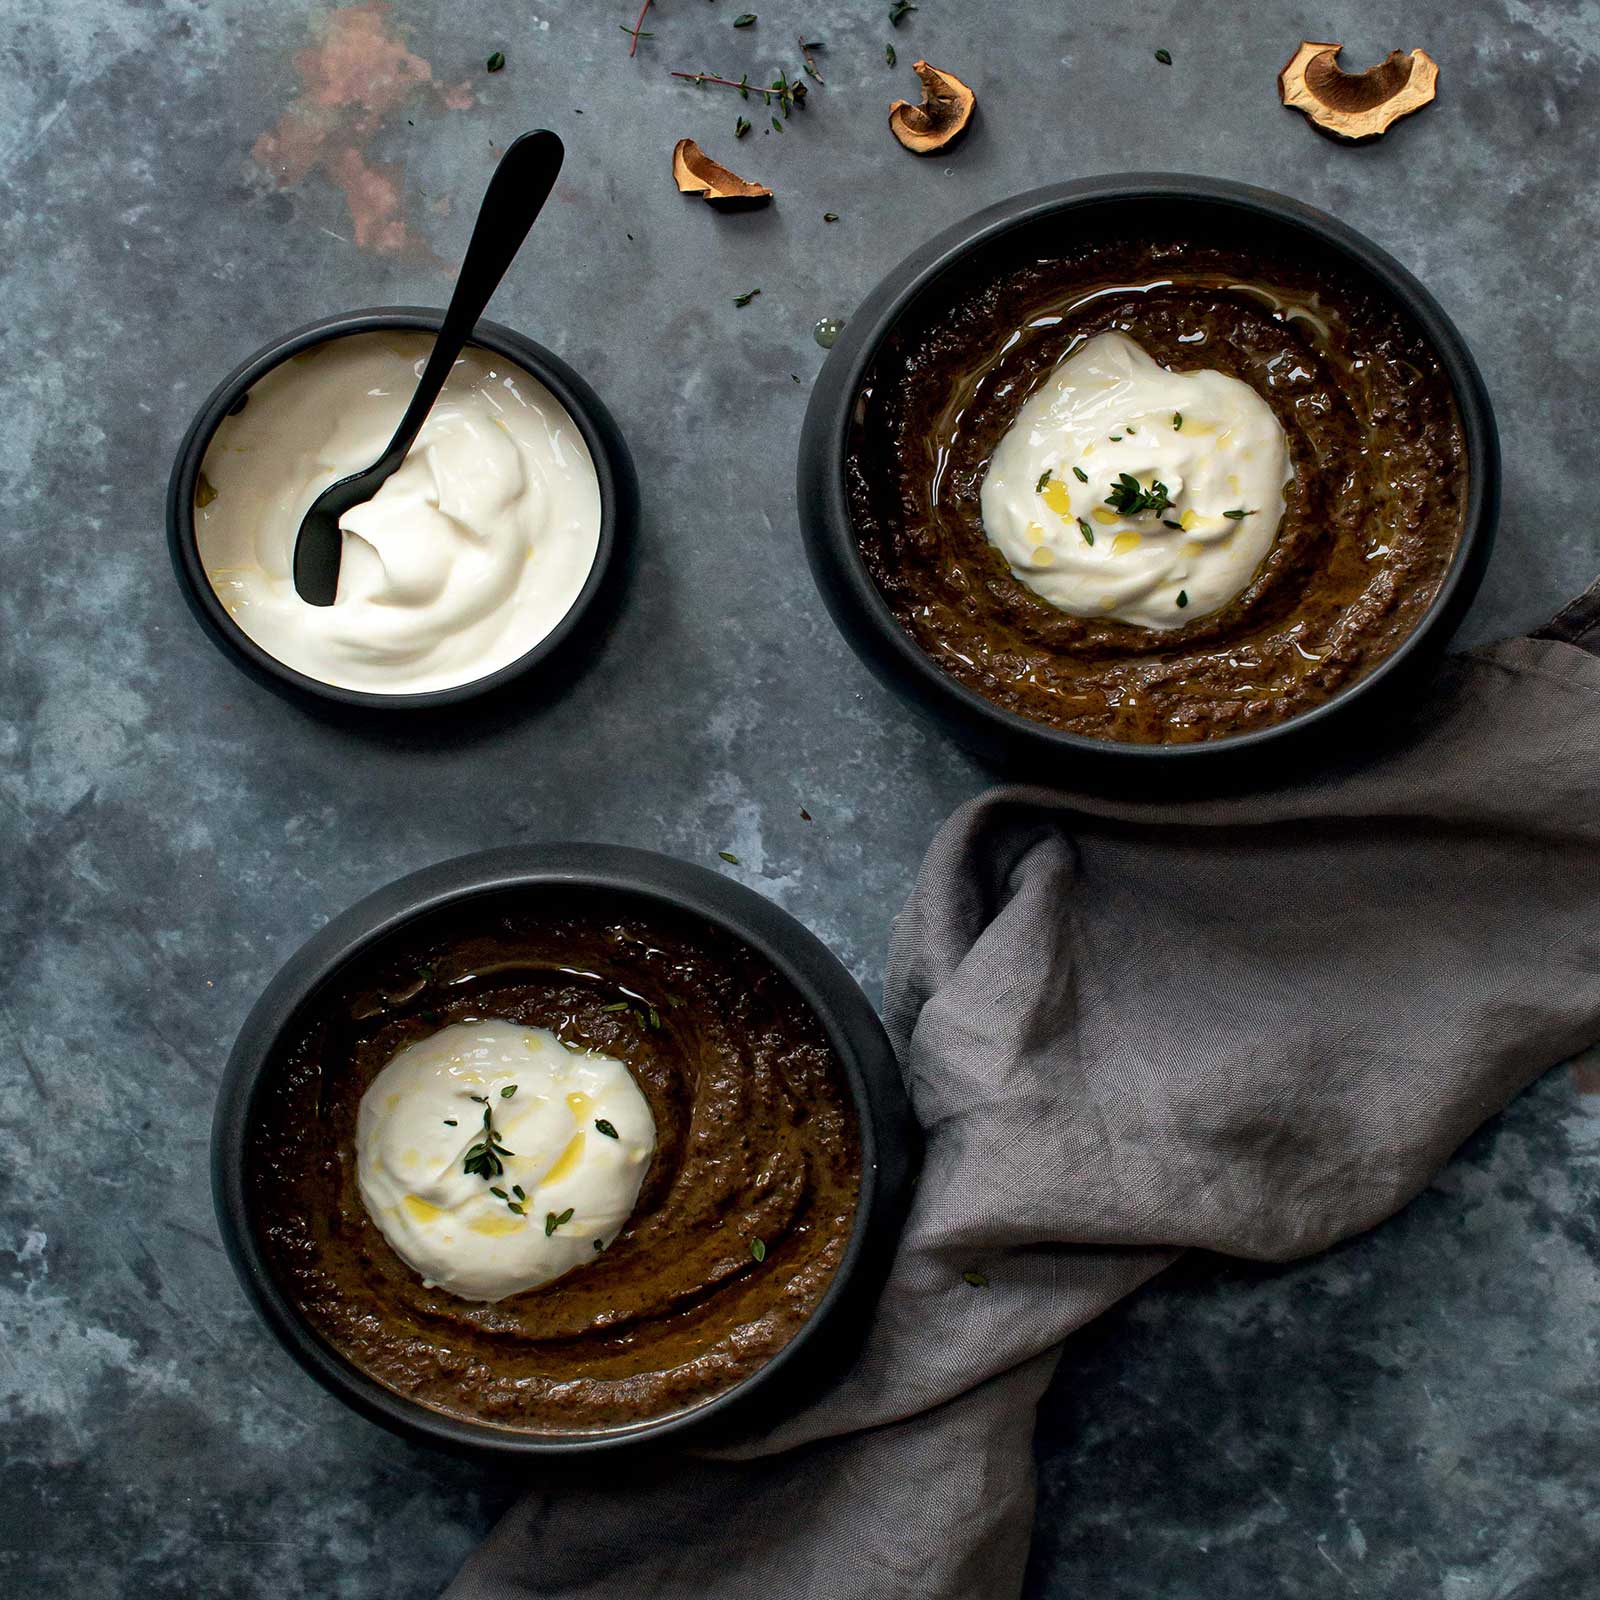 Two dark bowls of creamy wild mushroom soup shot overhead. A smaller bowl is filled with coconut yoghurt. The bowls of soup have a dollop of yoghurt on top.